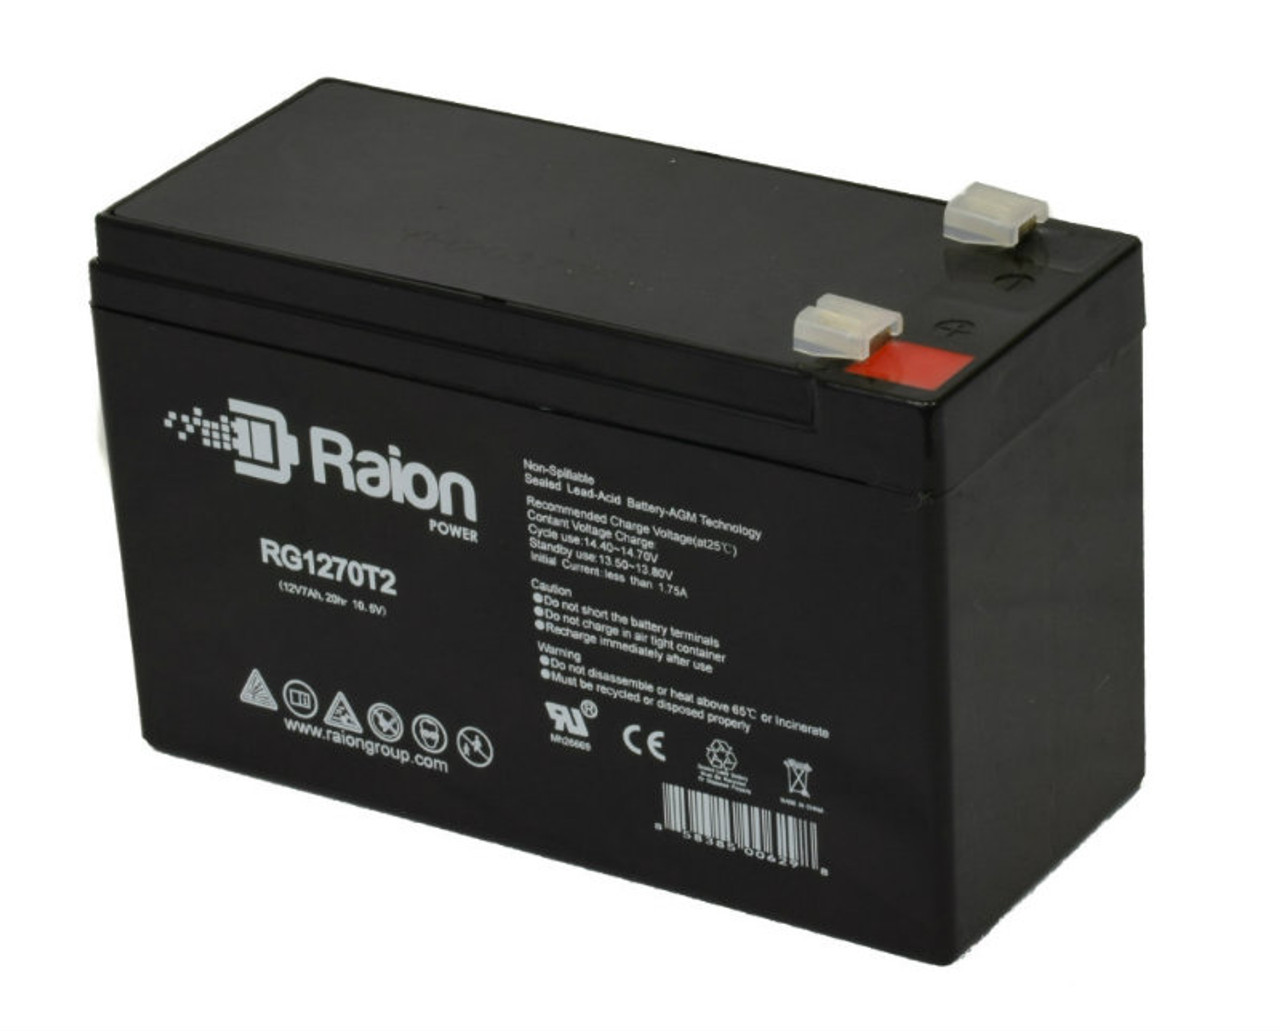 Raion Power RG1270T1 12V 7Ah Non-Spillable Replacement Battery for BPOWER BPE 7.2-12 F1